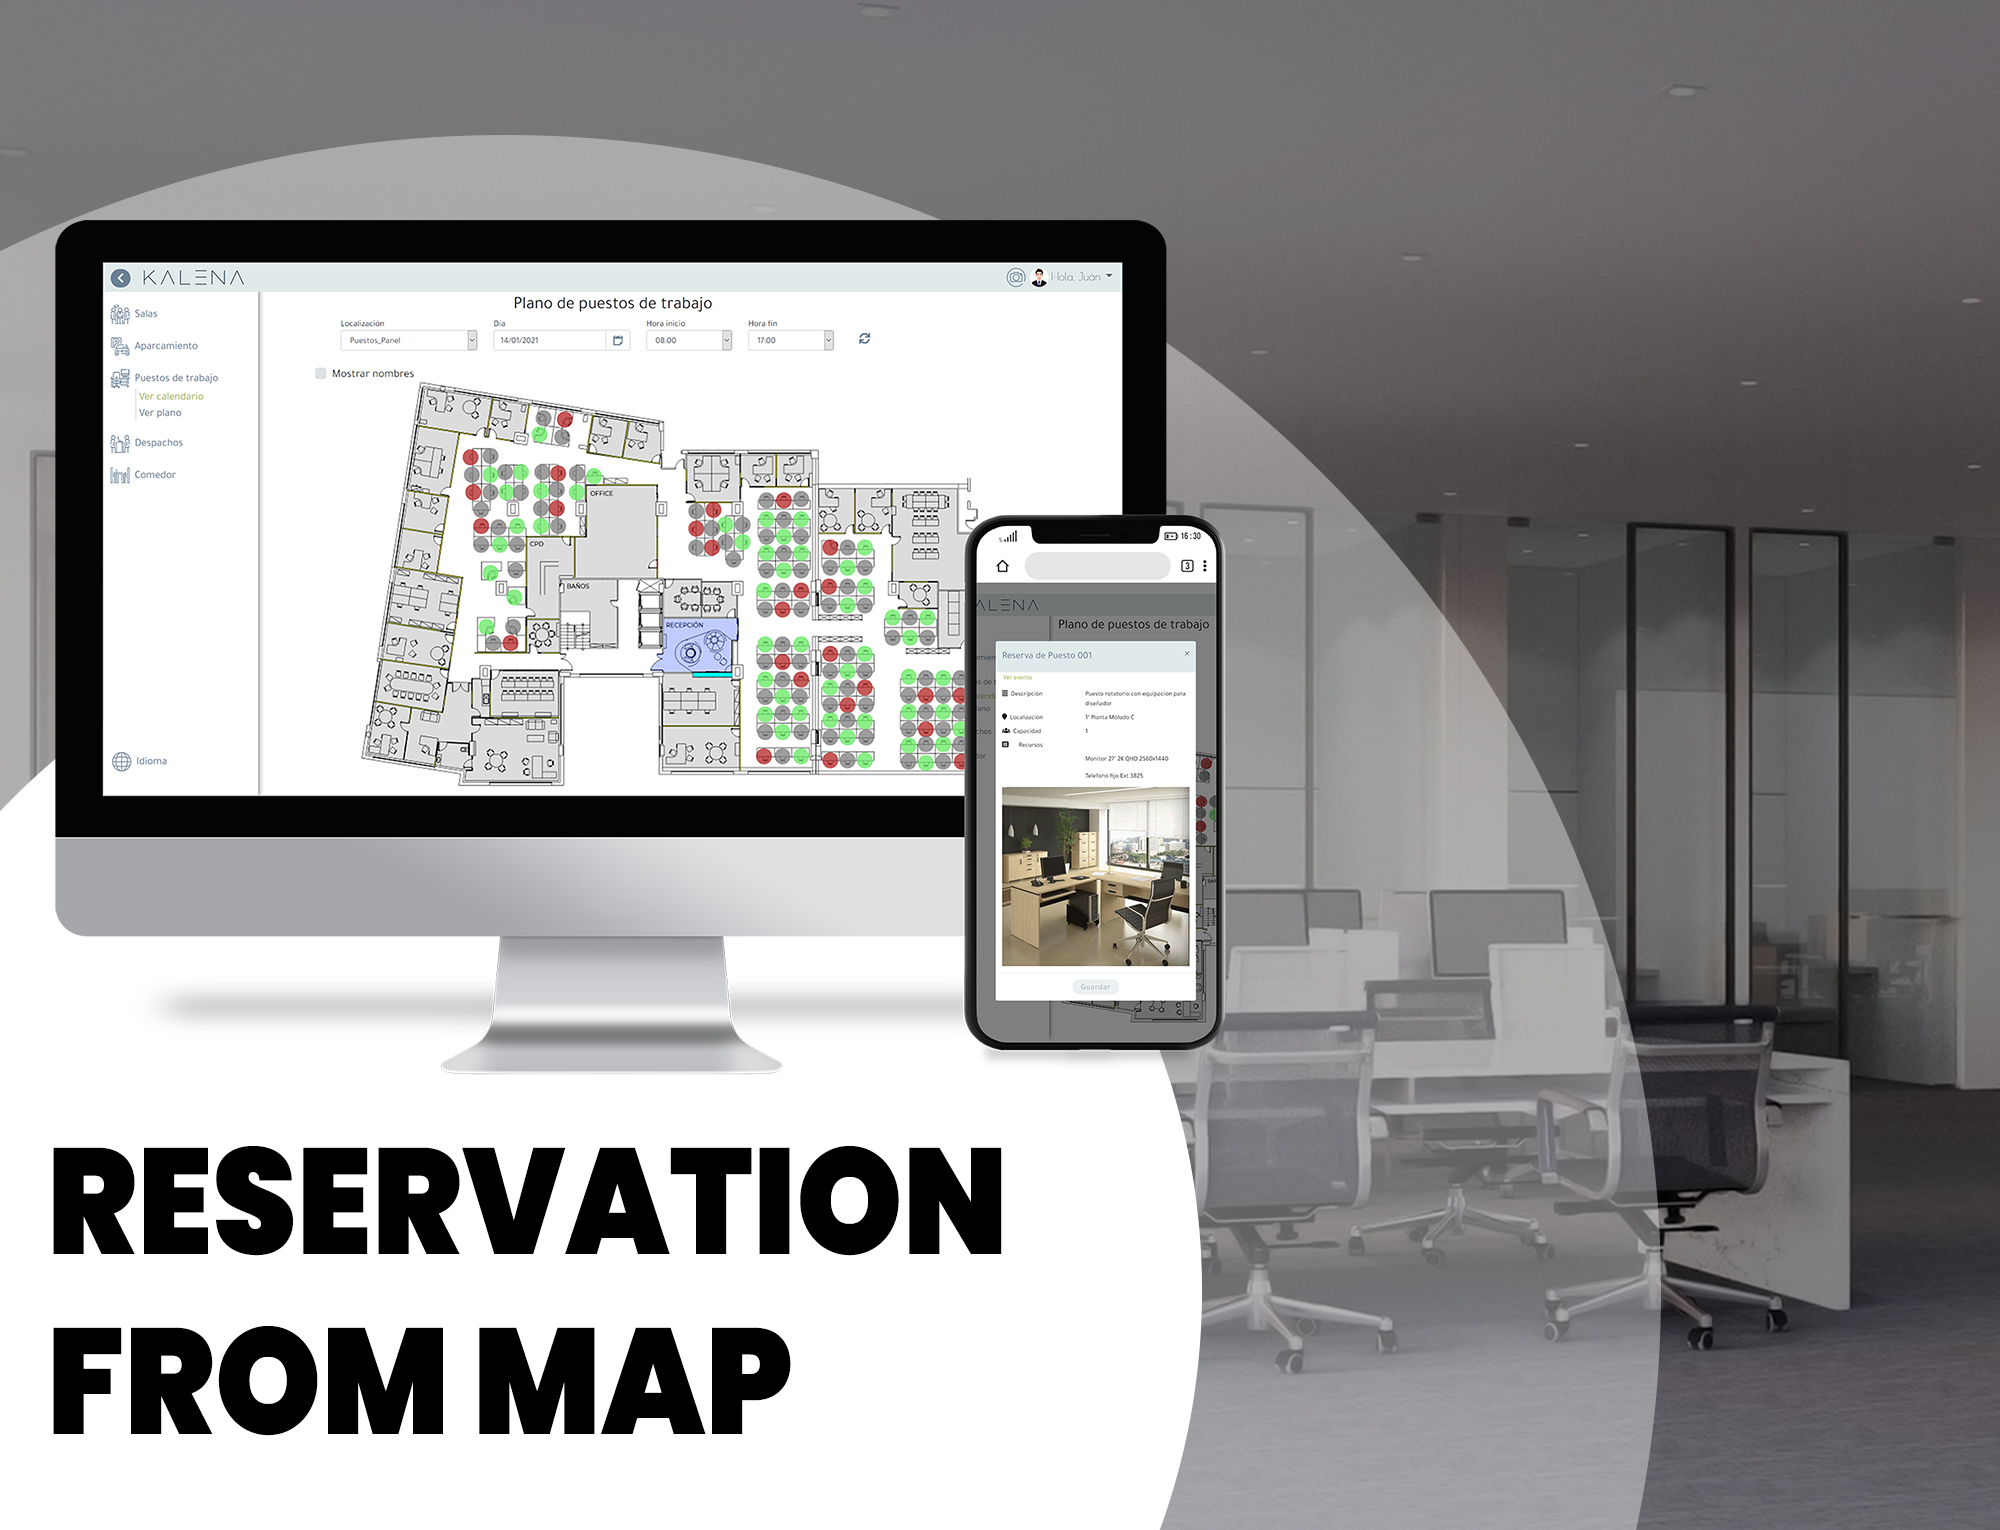 With Kalena you can use the floor plan view to book a meeting room, a workspace or a parking space. You will dynamically visualize the availability and occupation.